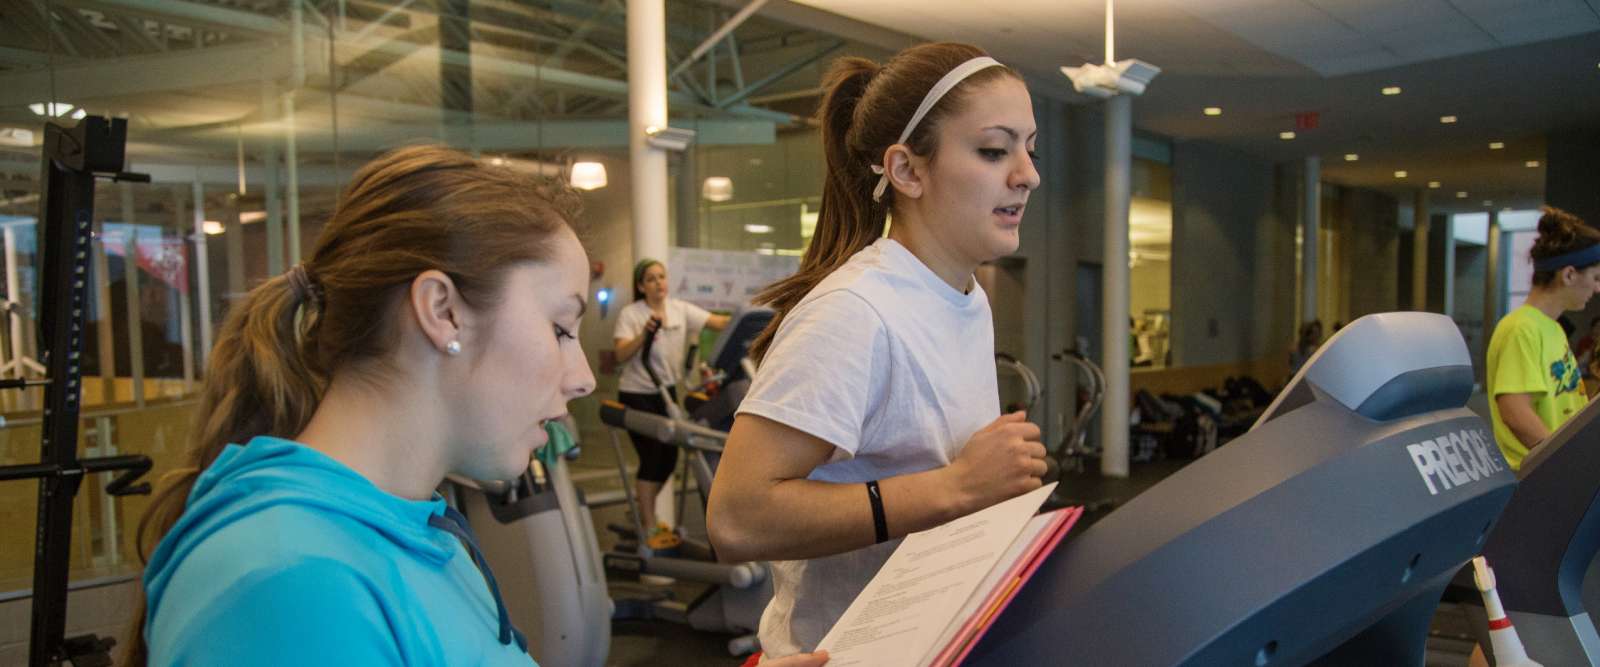 Students in fitness center